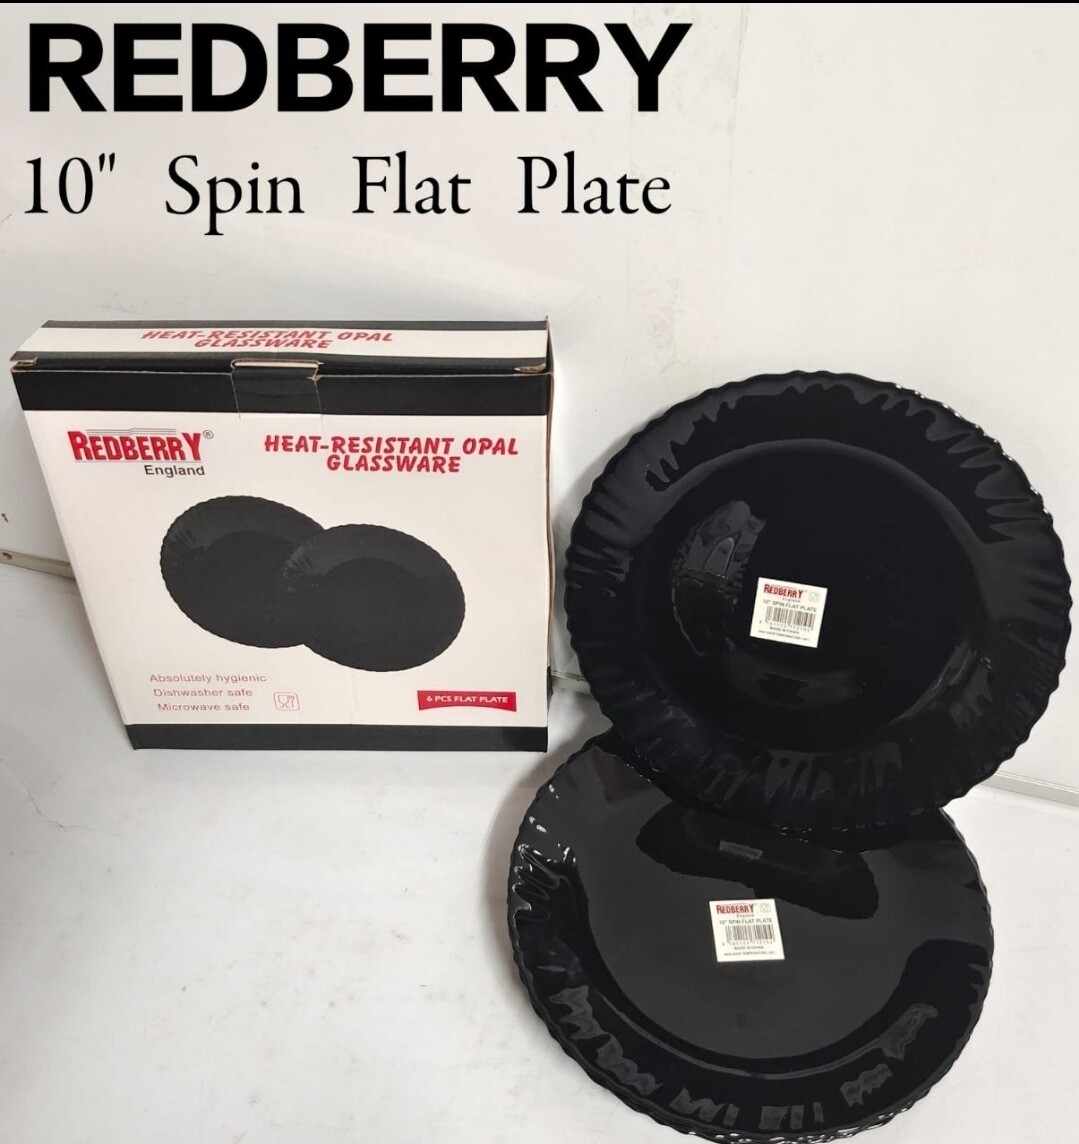 Redberry premium range of opalware 10" Spin Plate BLACK  6pcs in a gift box